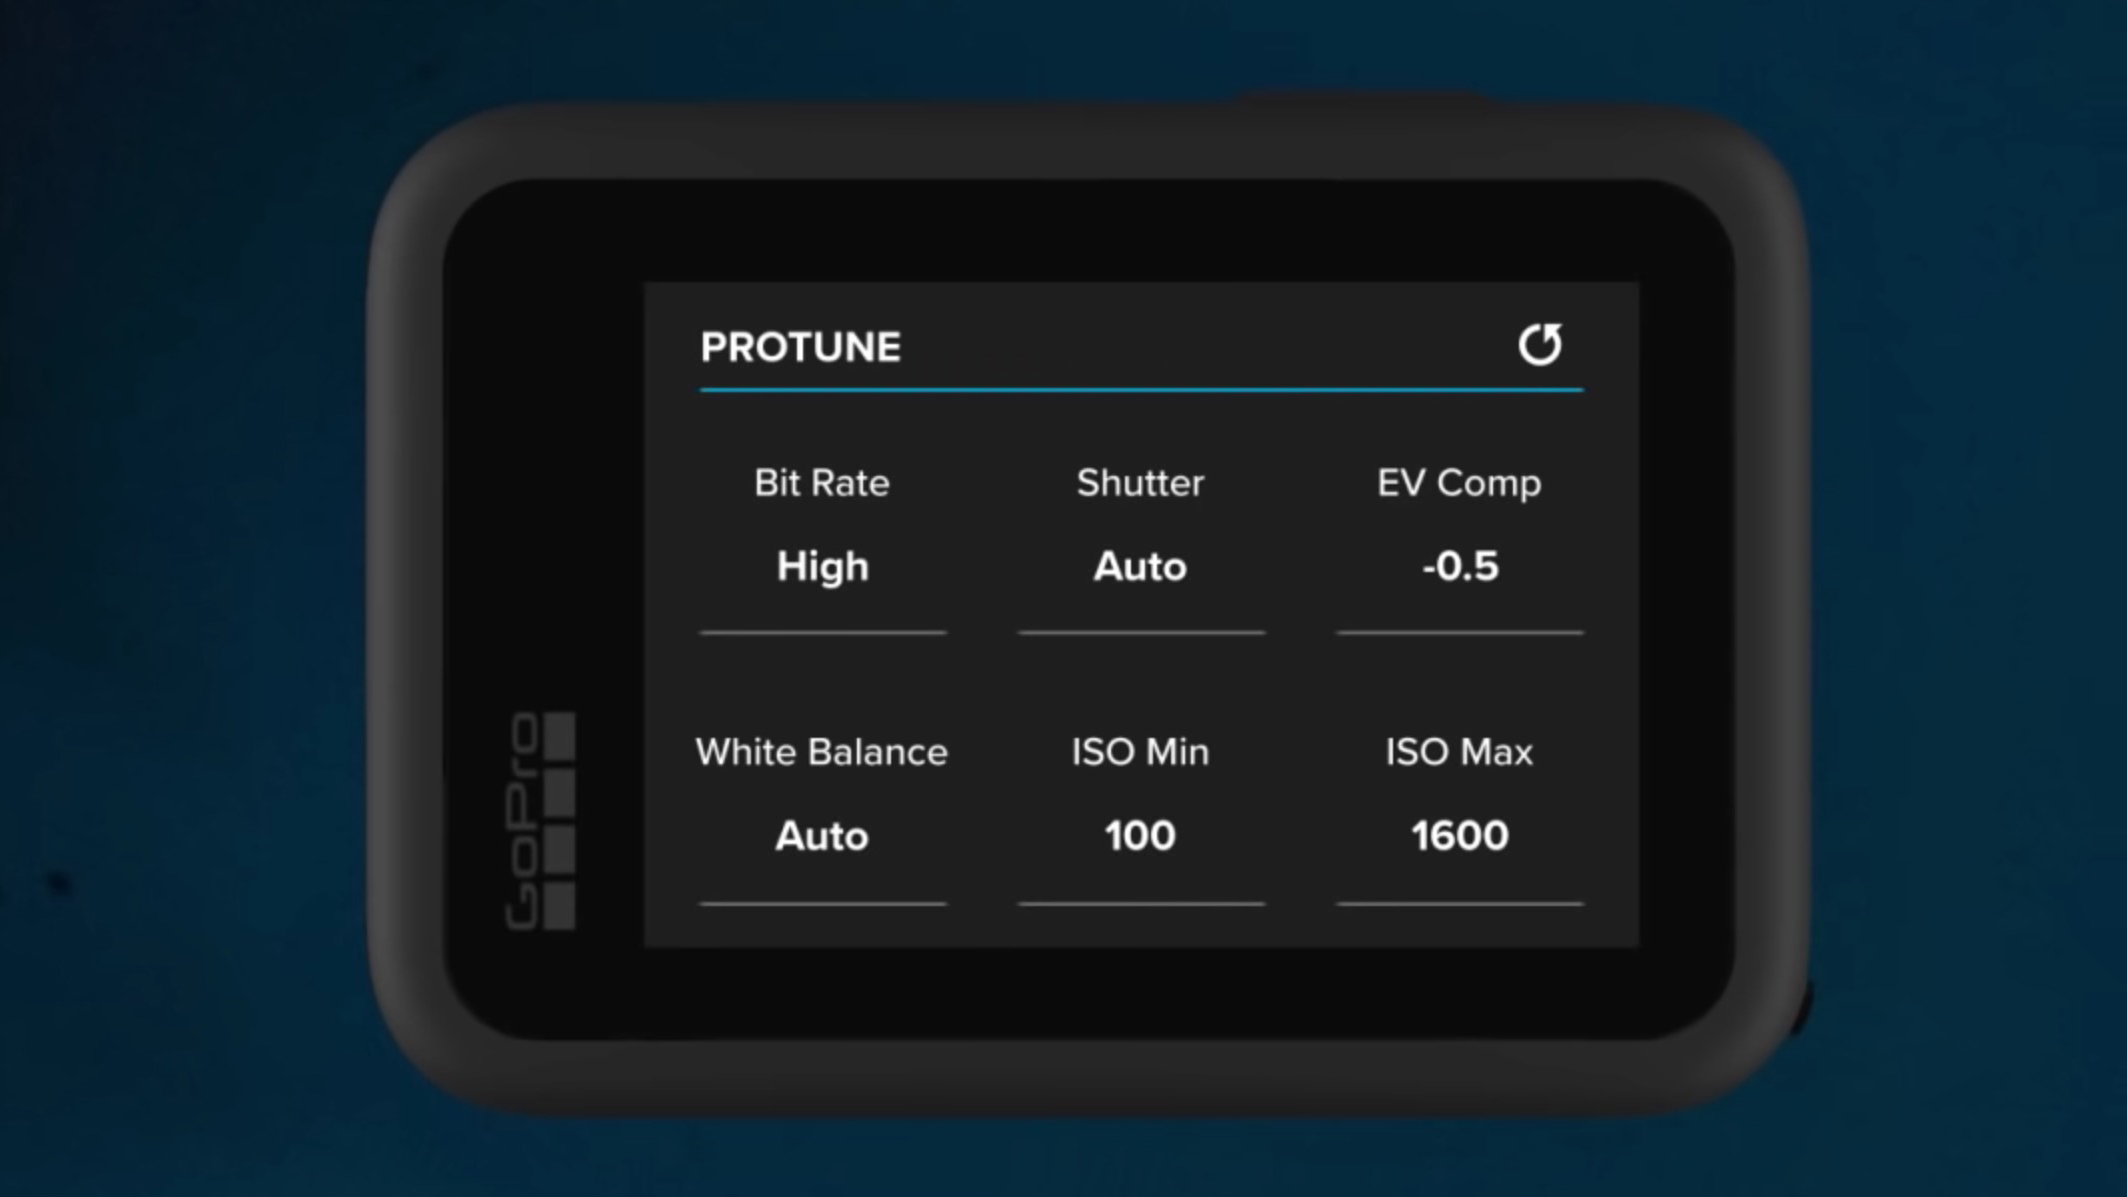 The back of a GoPro camera showing the ProTune settings menu